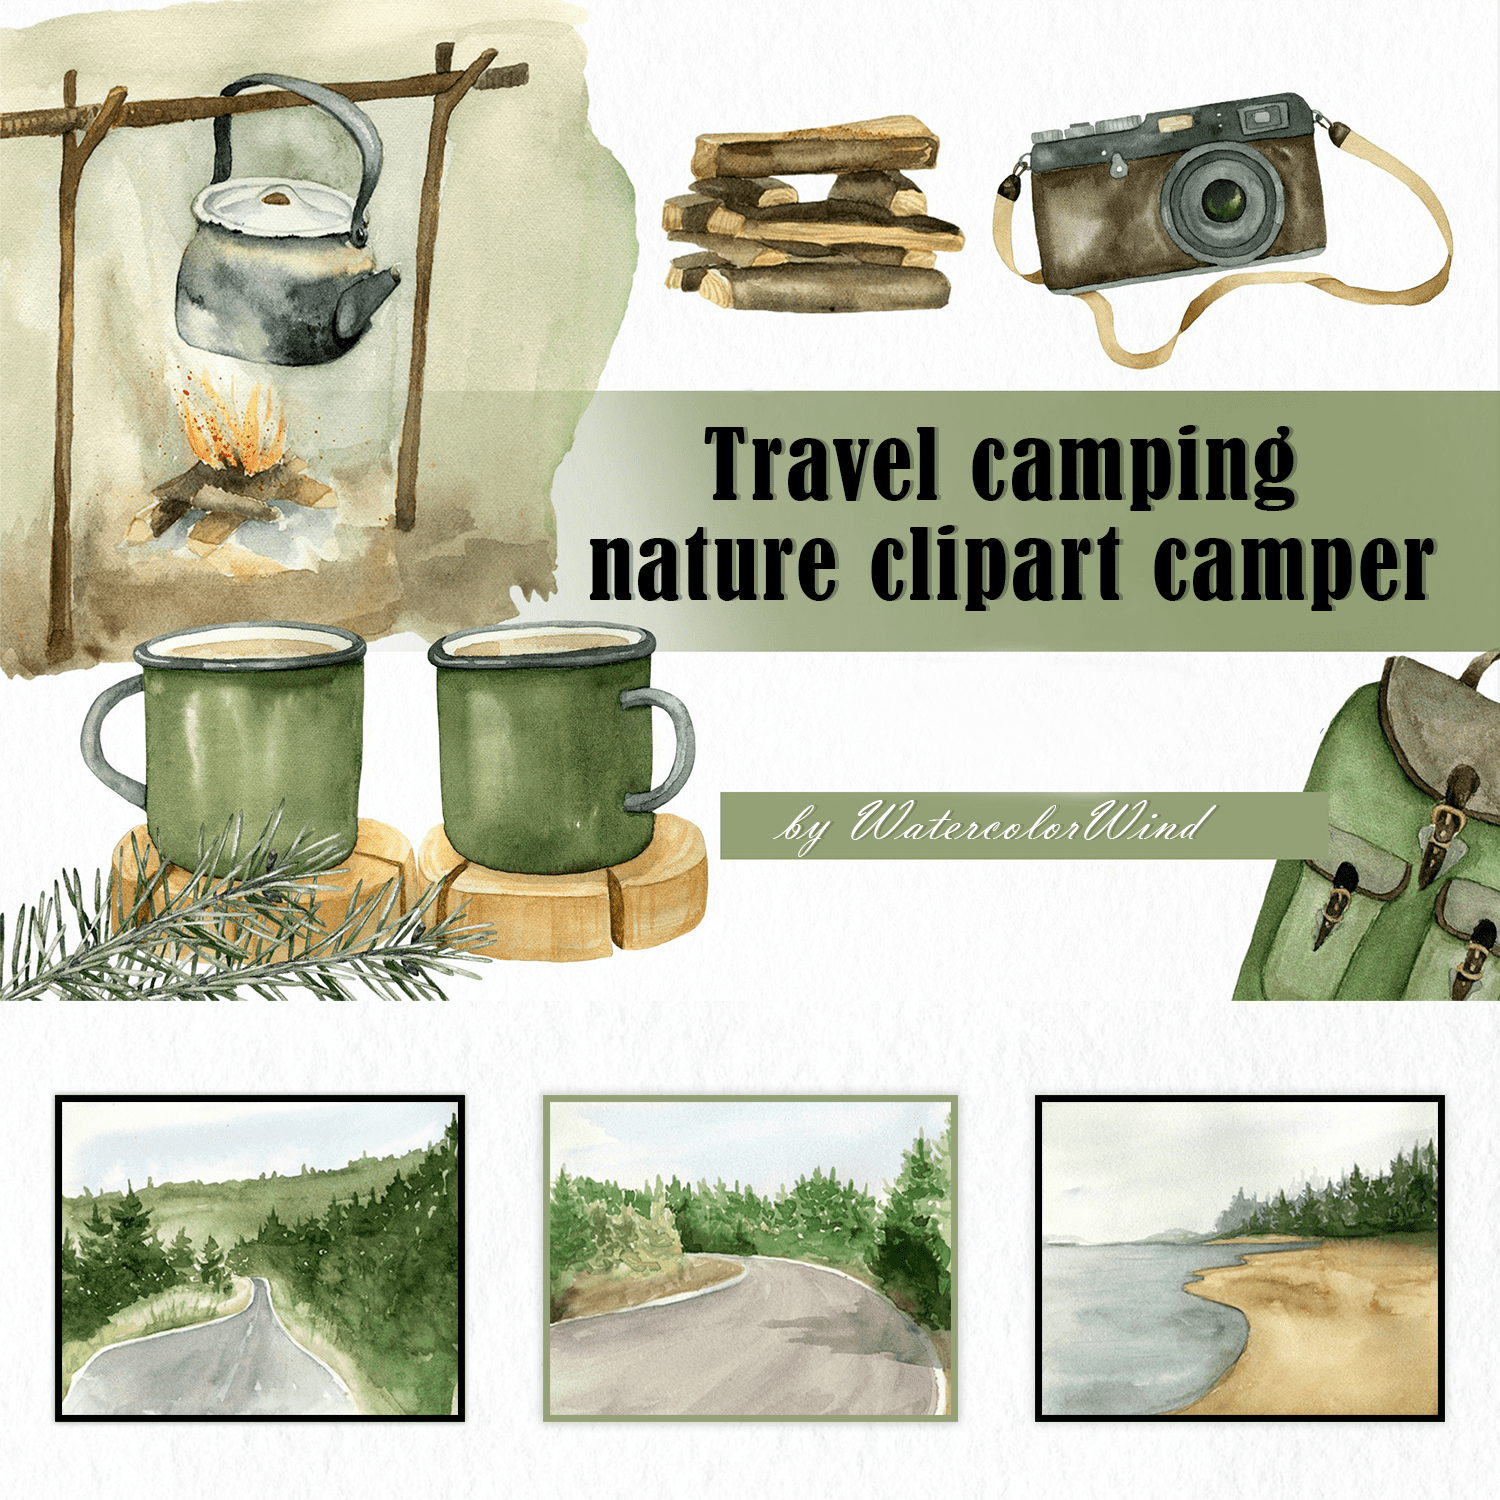 Travel camping nature clipart camper.